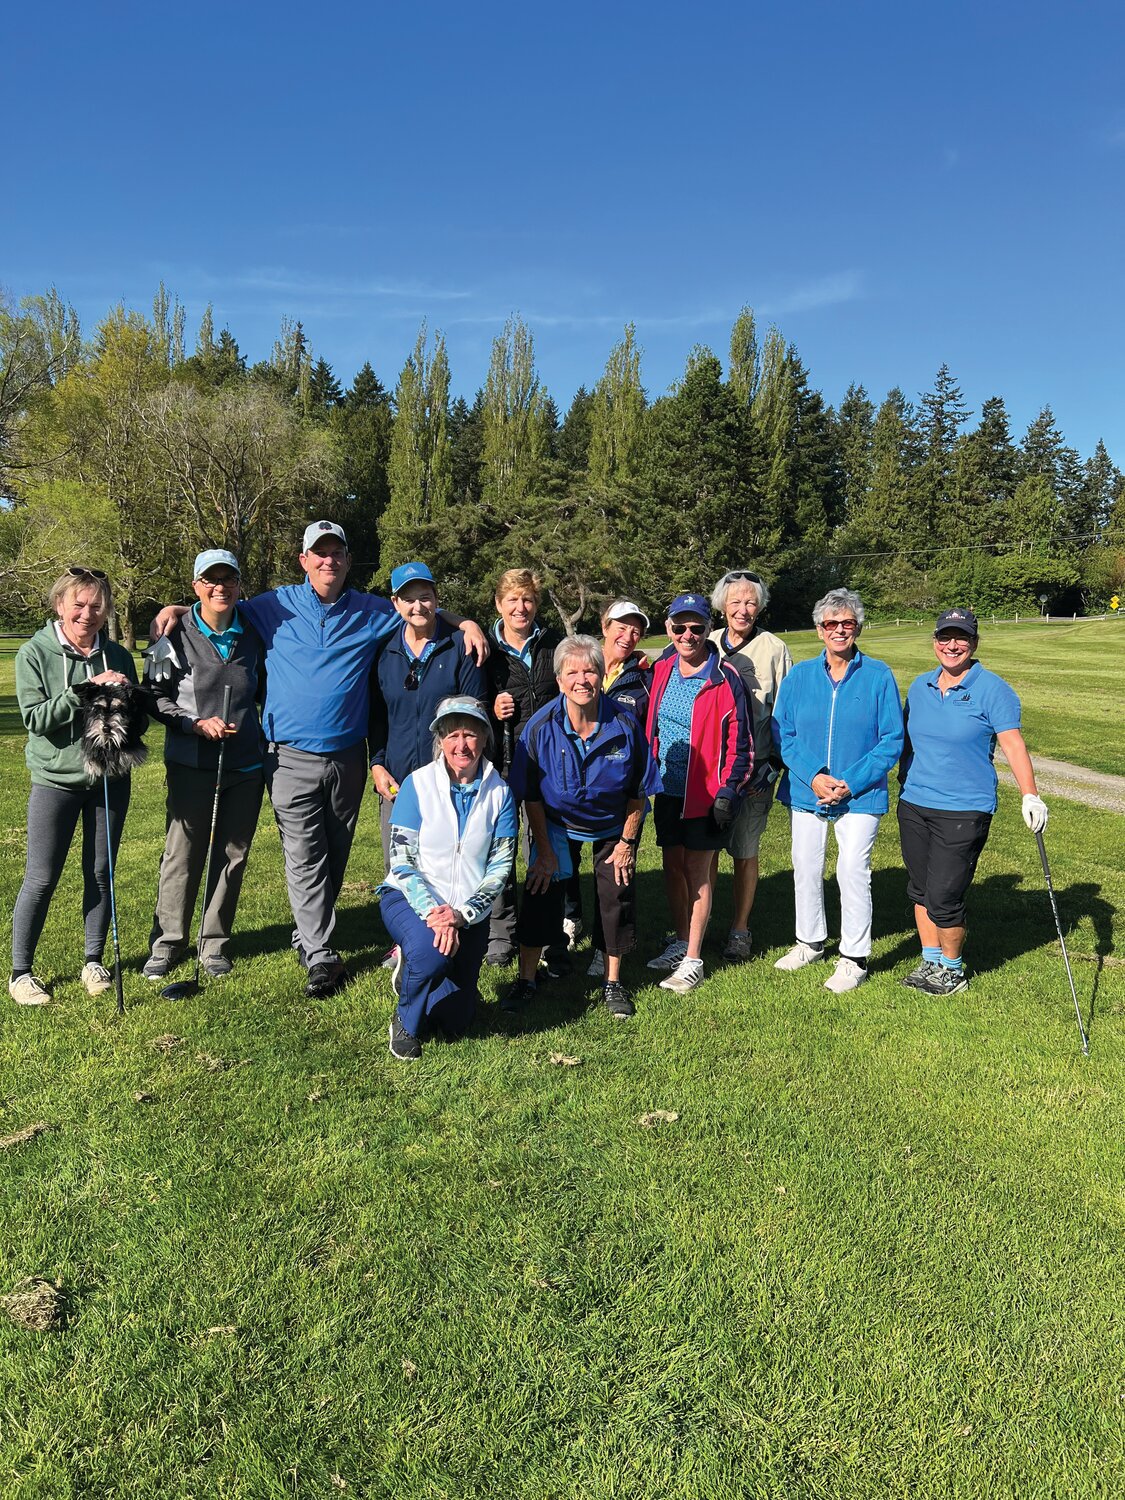 Members of the Discovery Bay Women’s Club pose with pro golfer Jeff Kent prior to the “Beat the Pro” competition on Thursday.